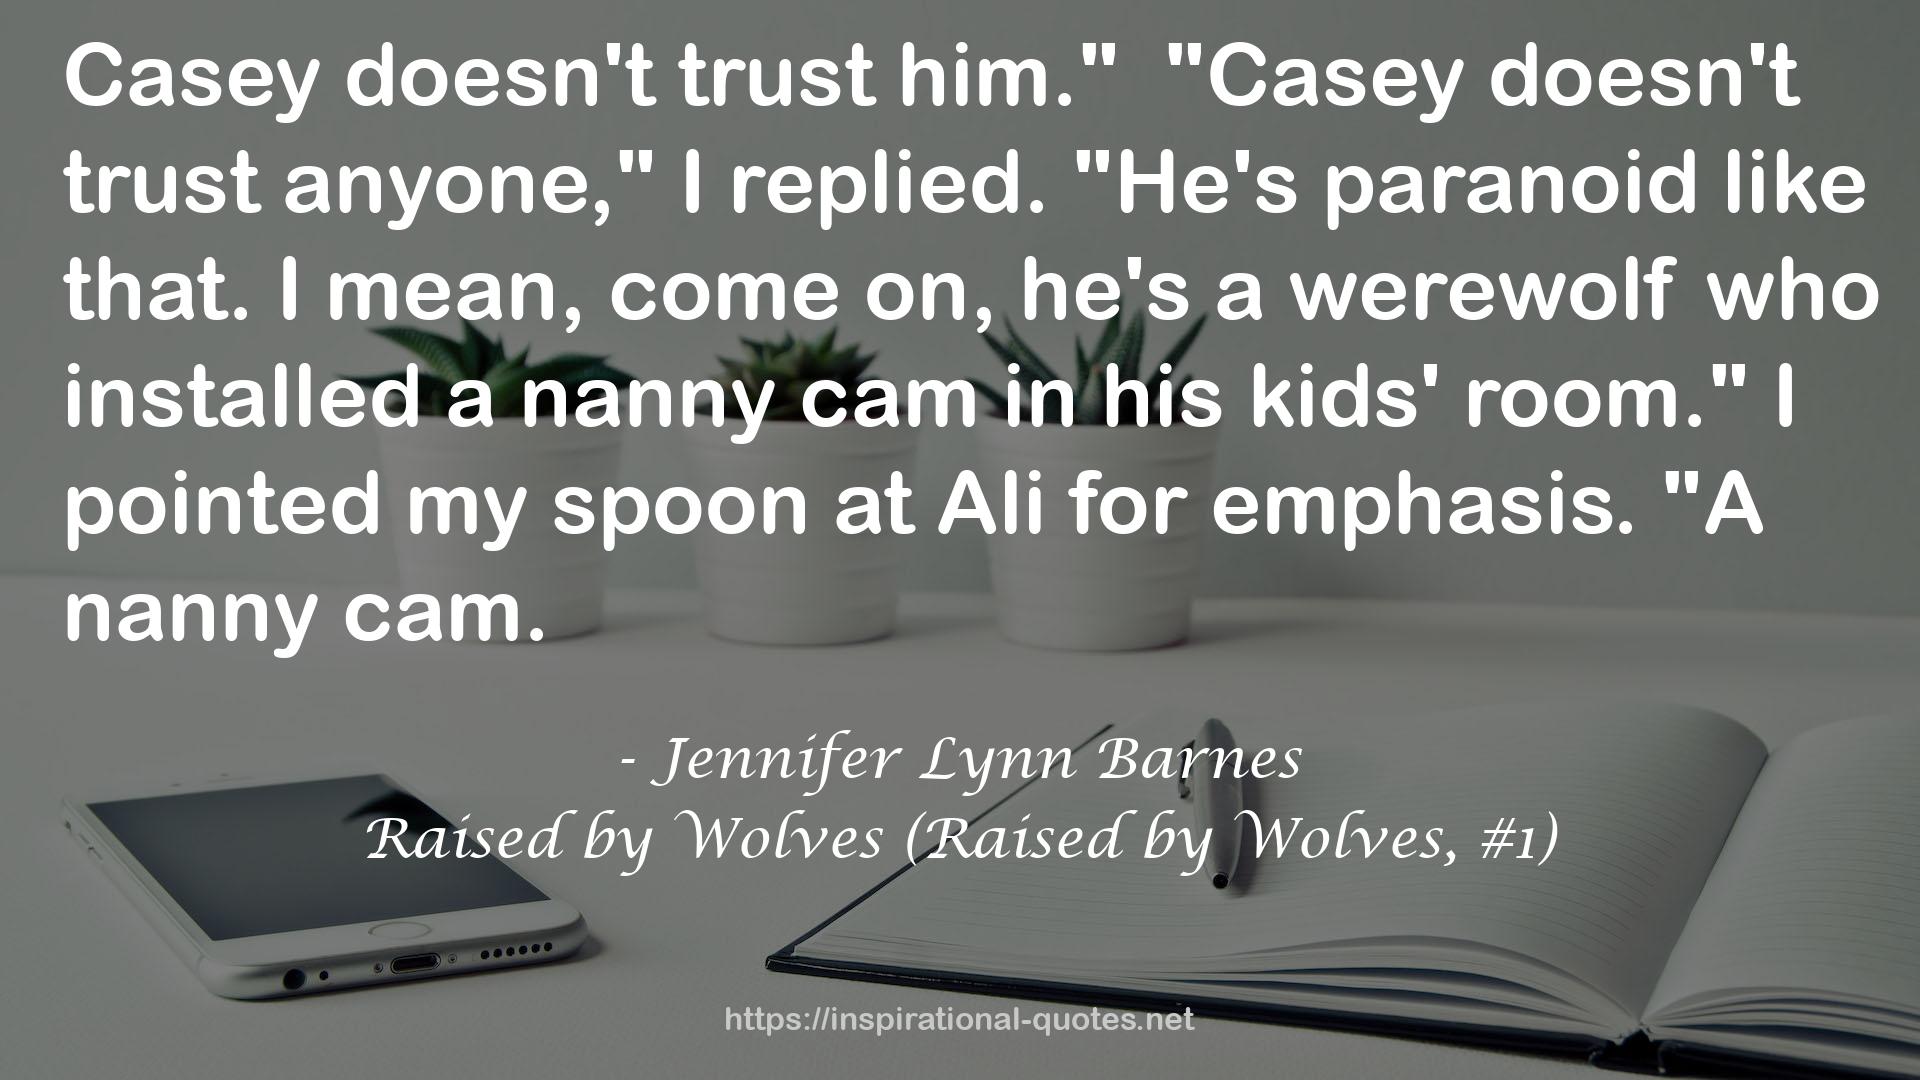 Raised by Wolves (Raised by Wolves, #1) QUOTES